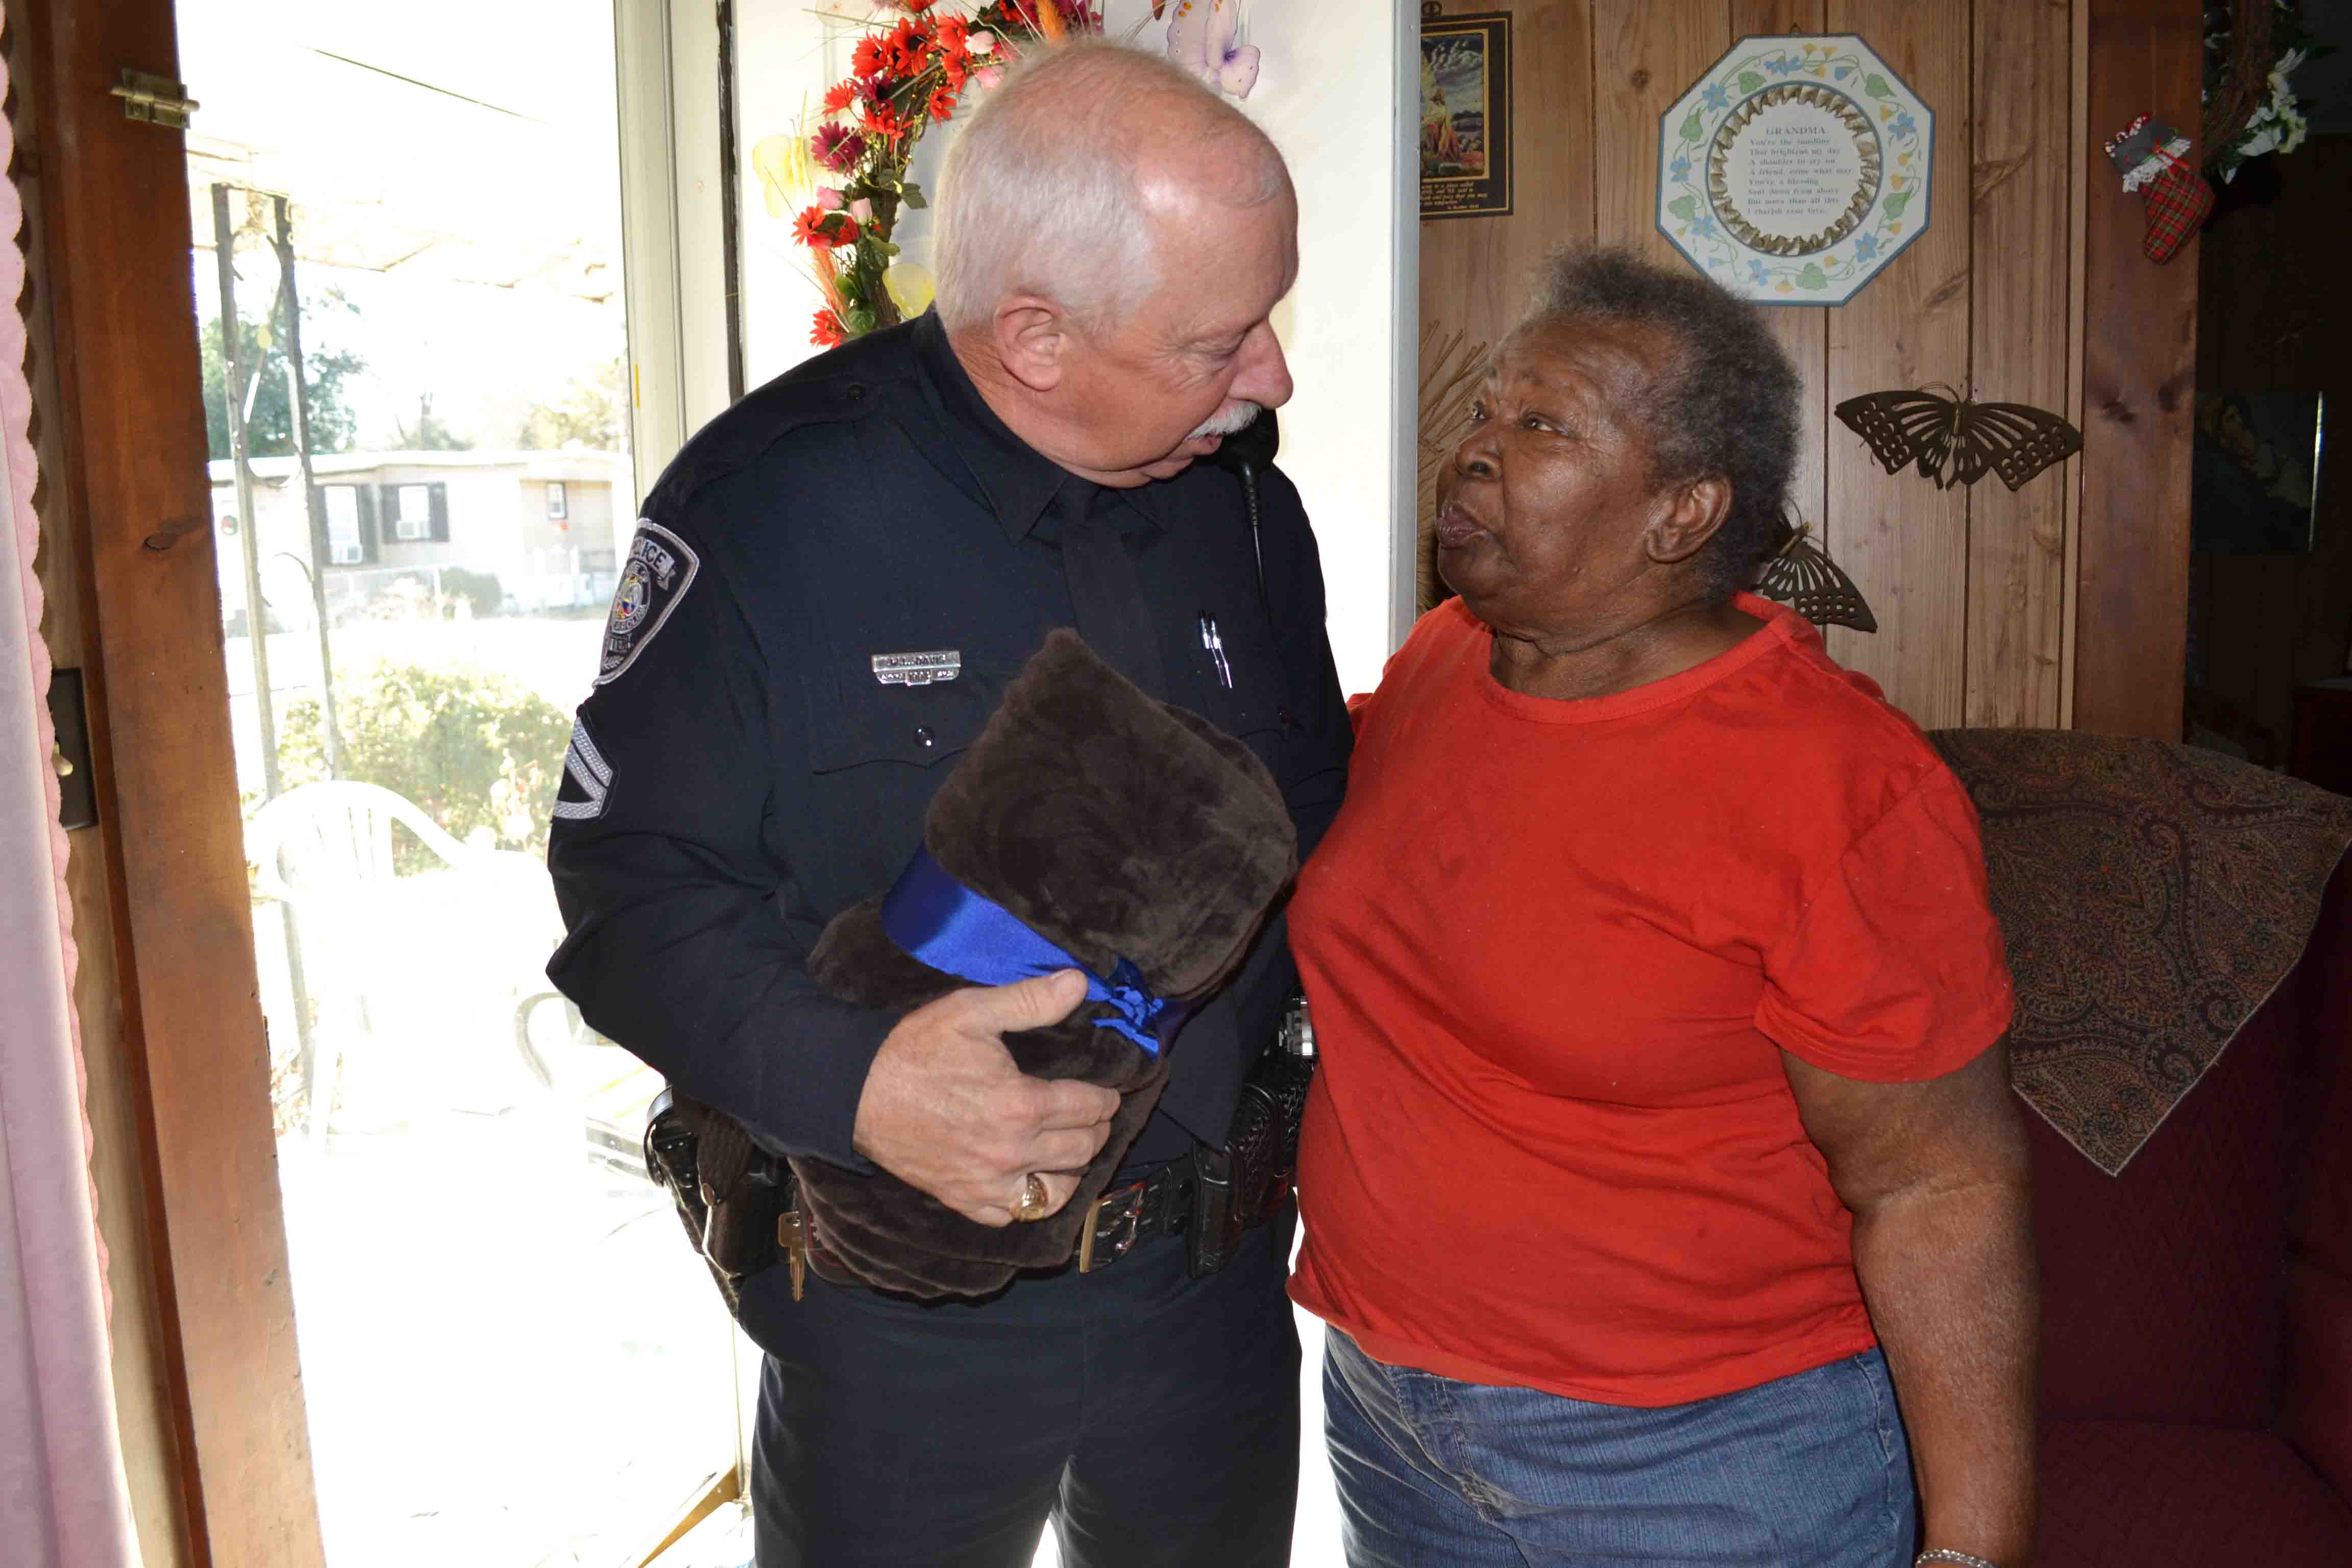 Papa G of Sumter Police Department assisting resident through the department's CheckMate program